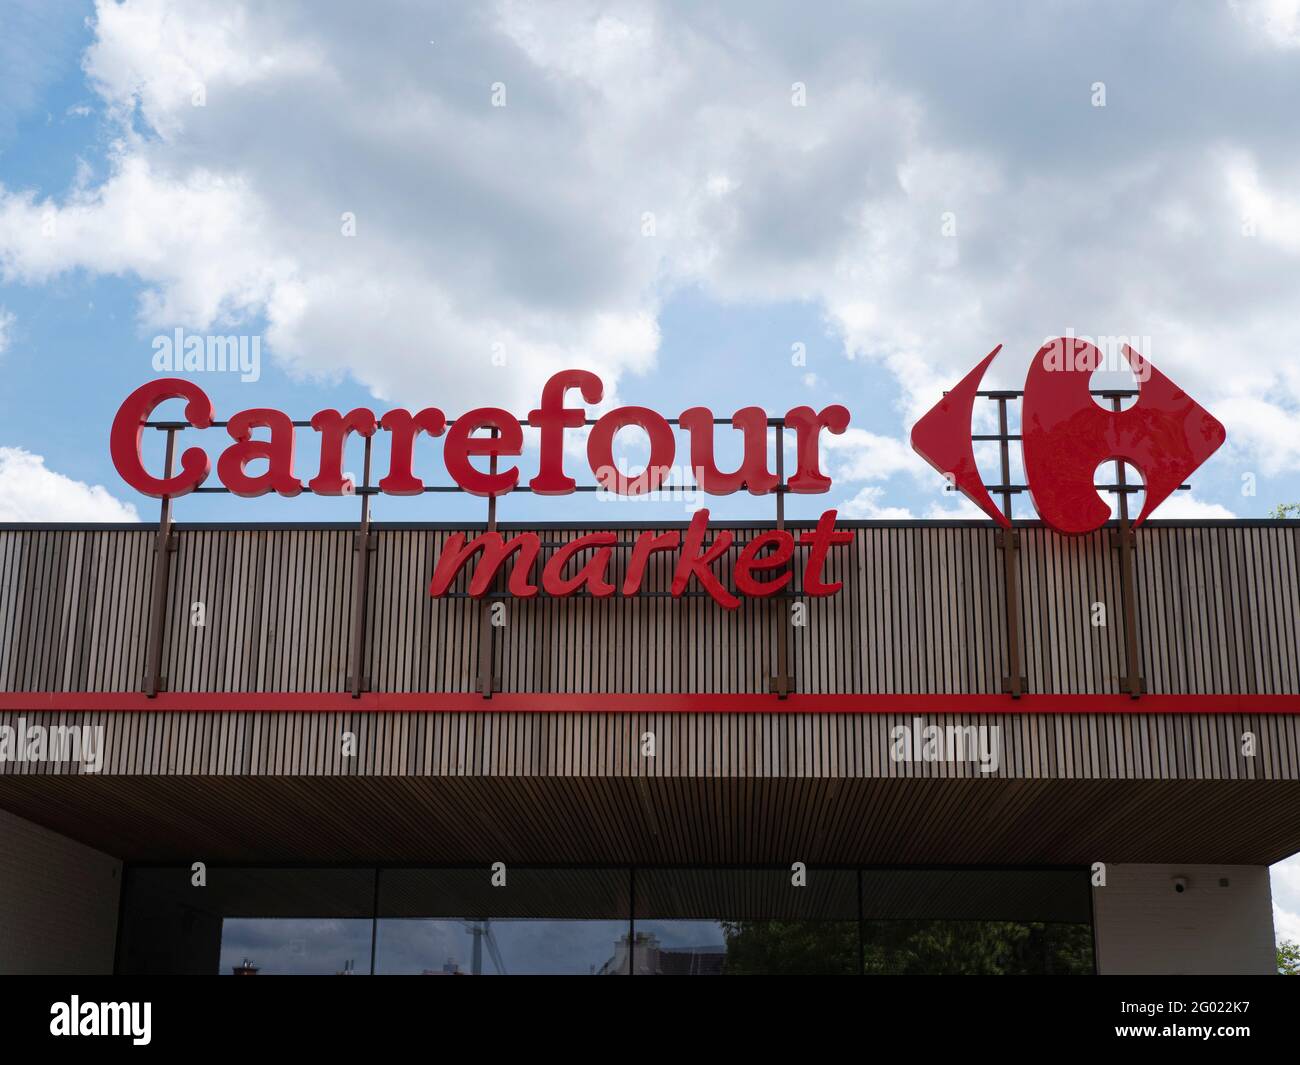 Sint Gillis Waas, Belgium, May 23, 2021, Logo and facade of a Carrefour Market, located in East Flanders, Belgium Stock Photo